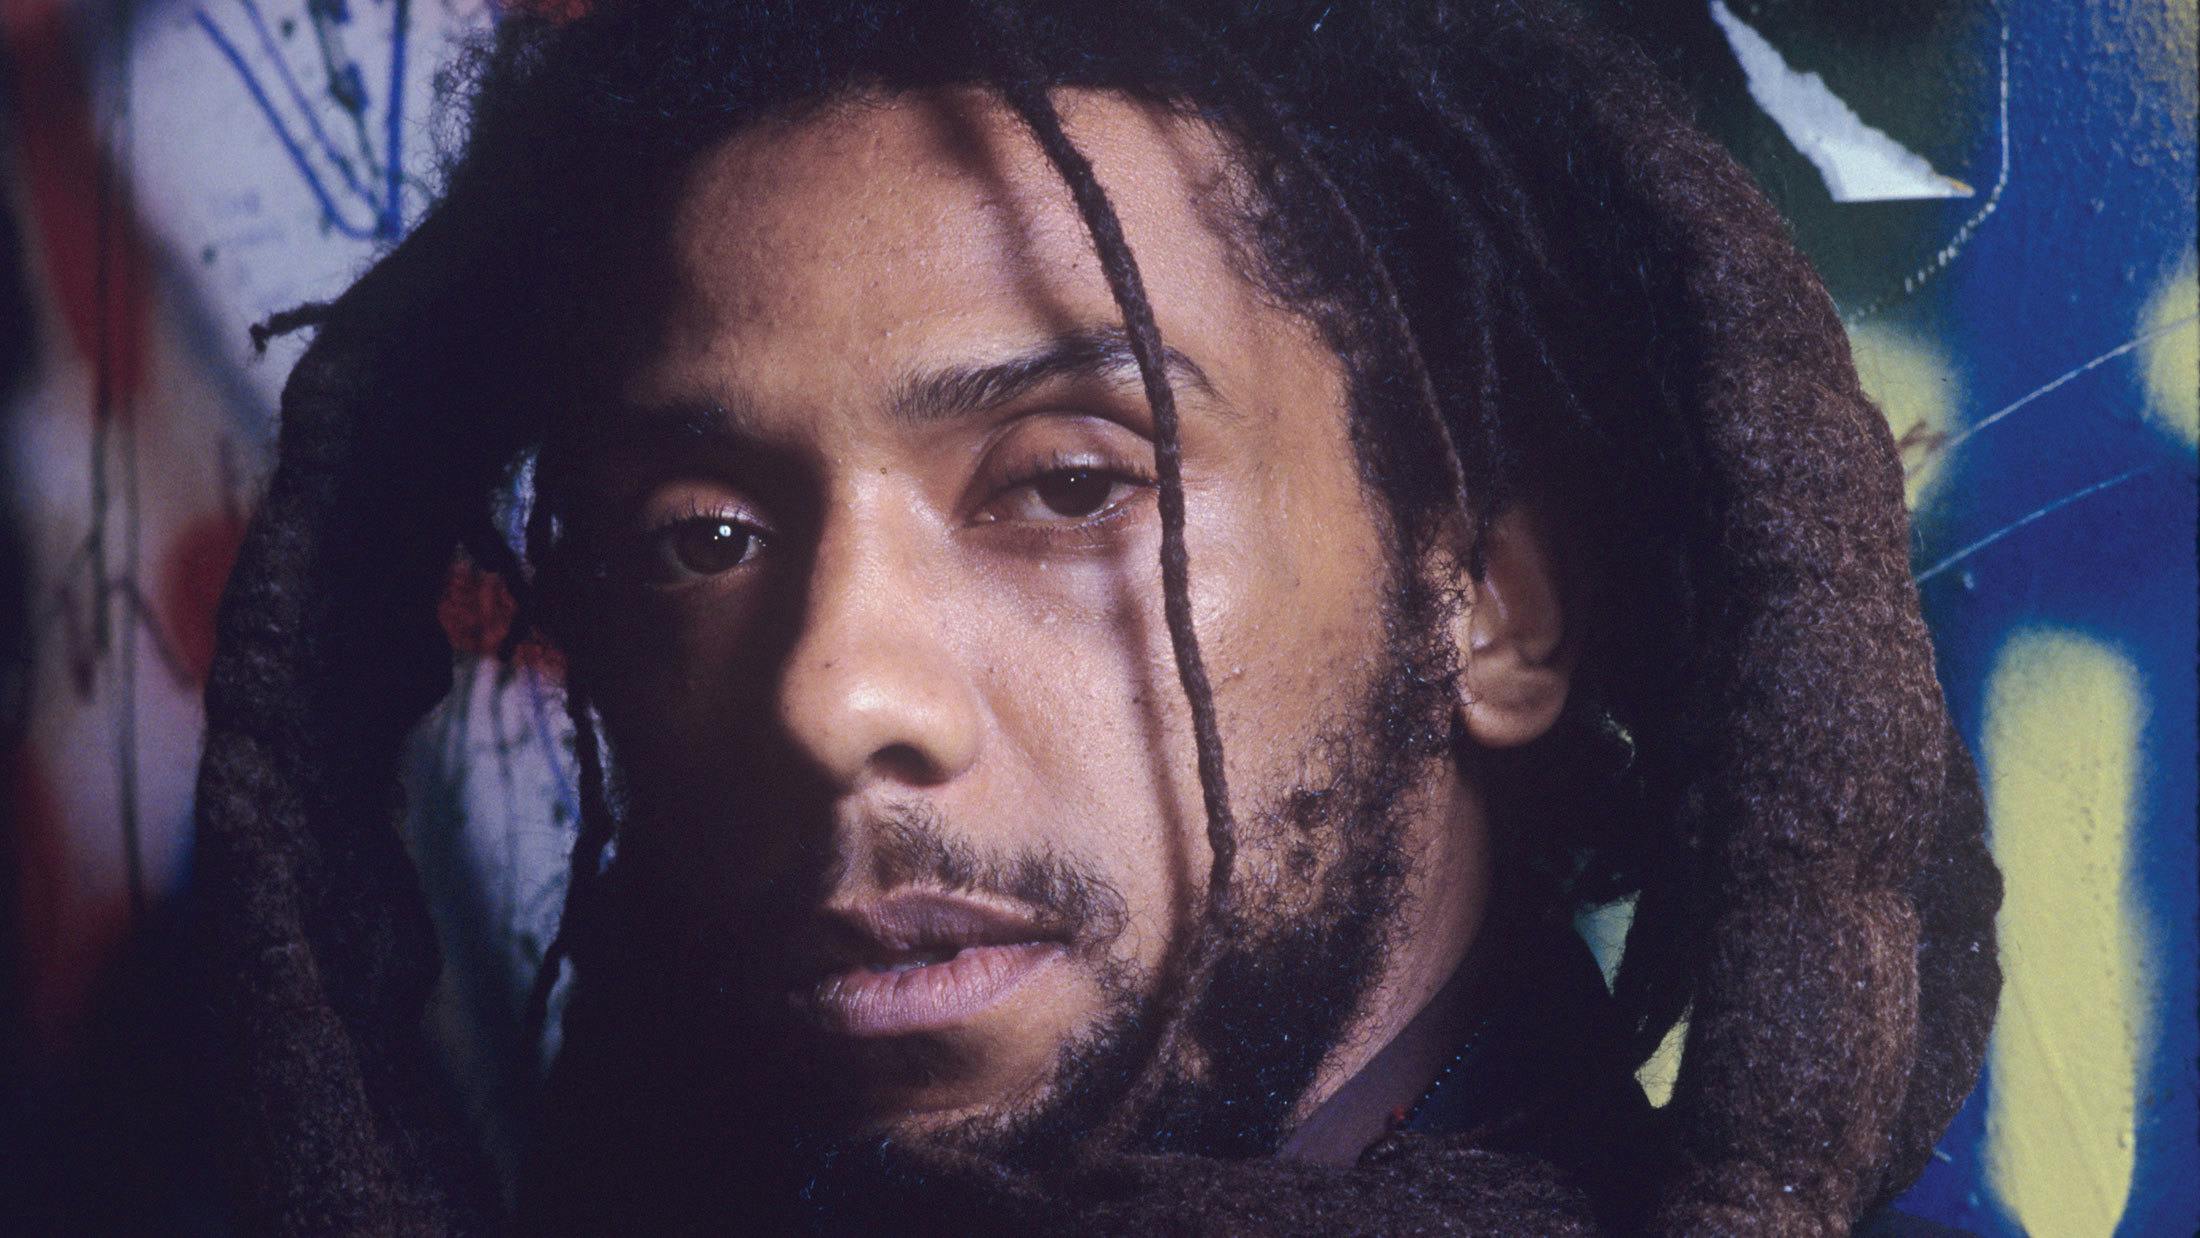 Bad Brains’ H.R.: “Don’t worry what people might say about you being strange or different… Ain’t none of that true”